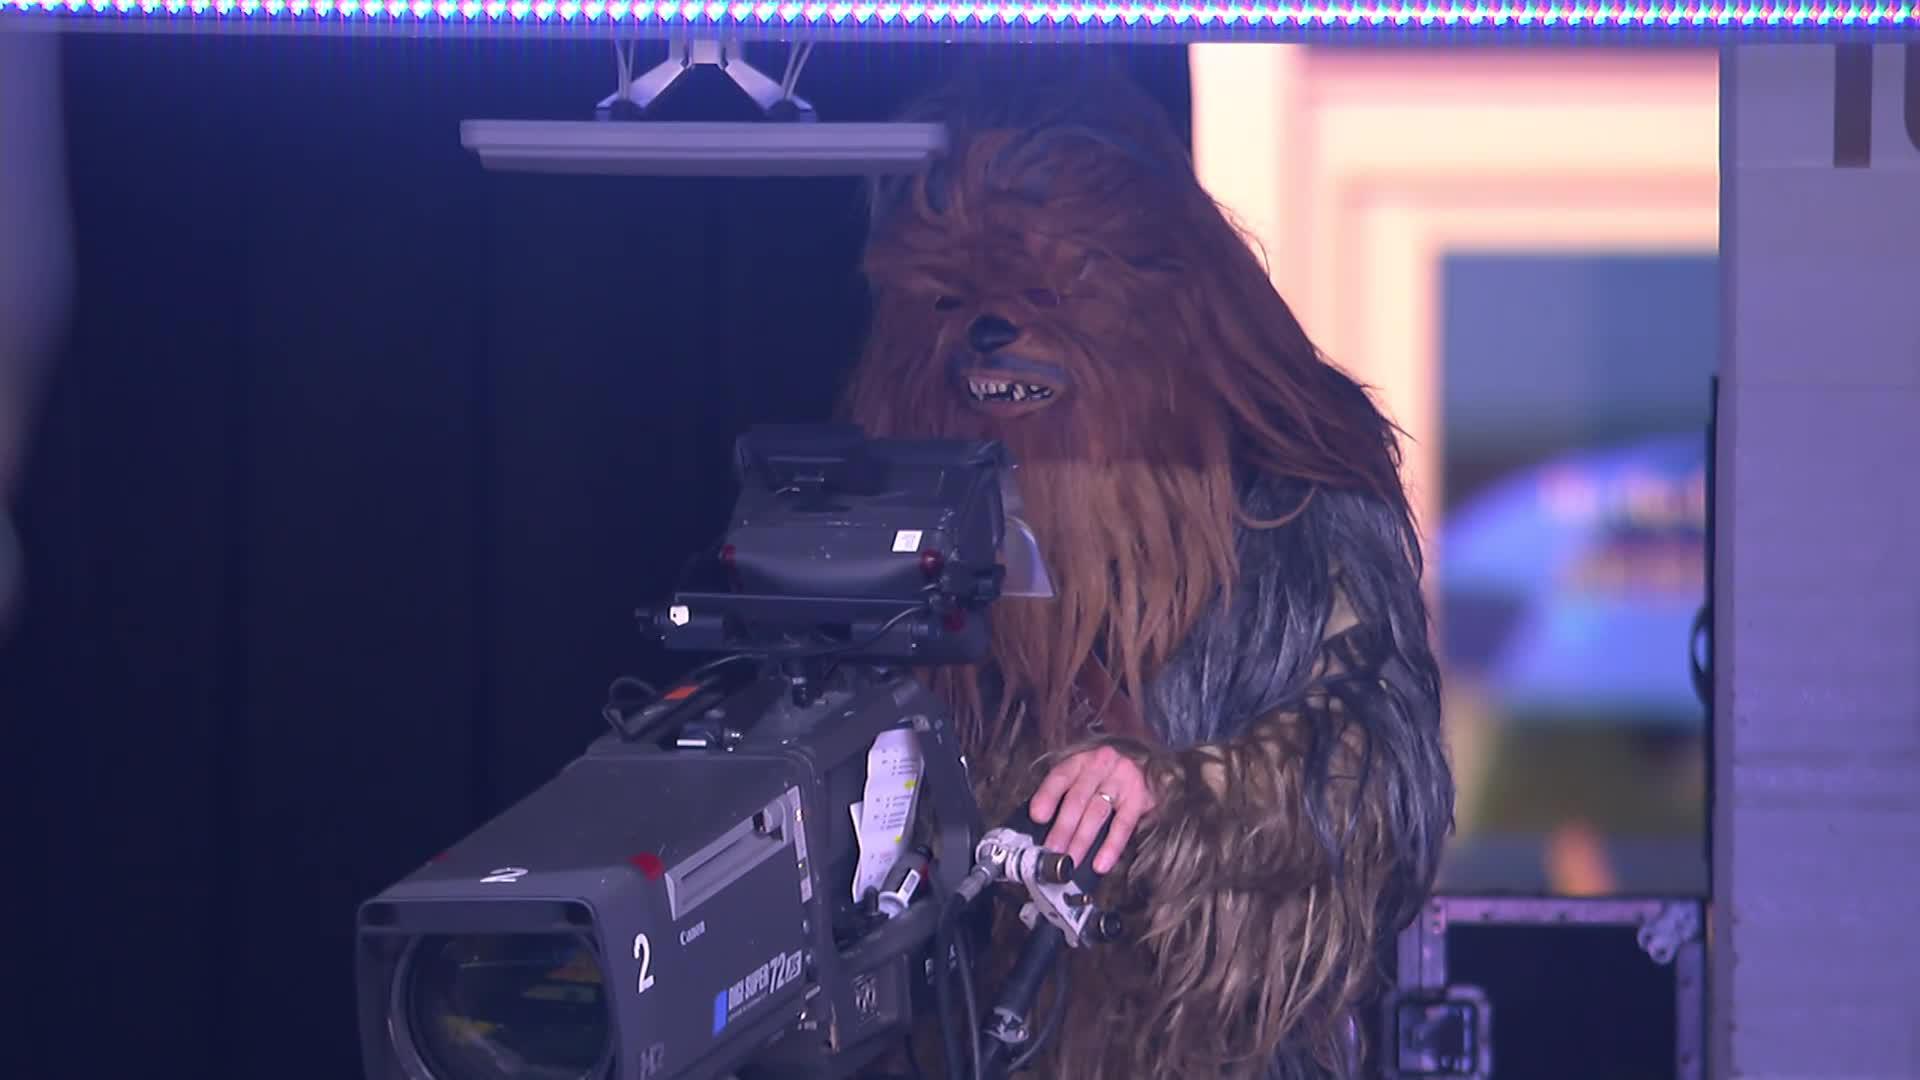 Chewbacca mans camera at Pelicans Star Wars Night | Pelicans-Pacers 1/24/22